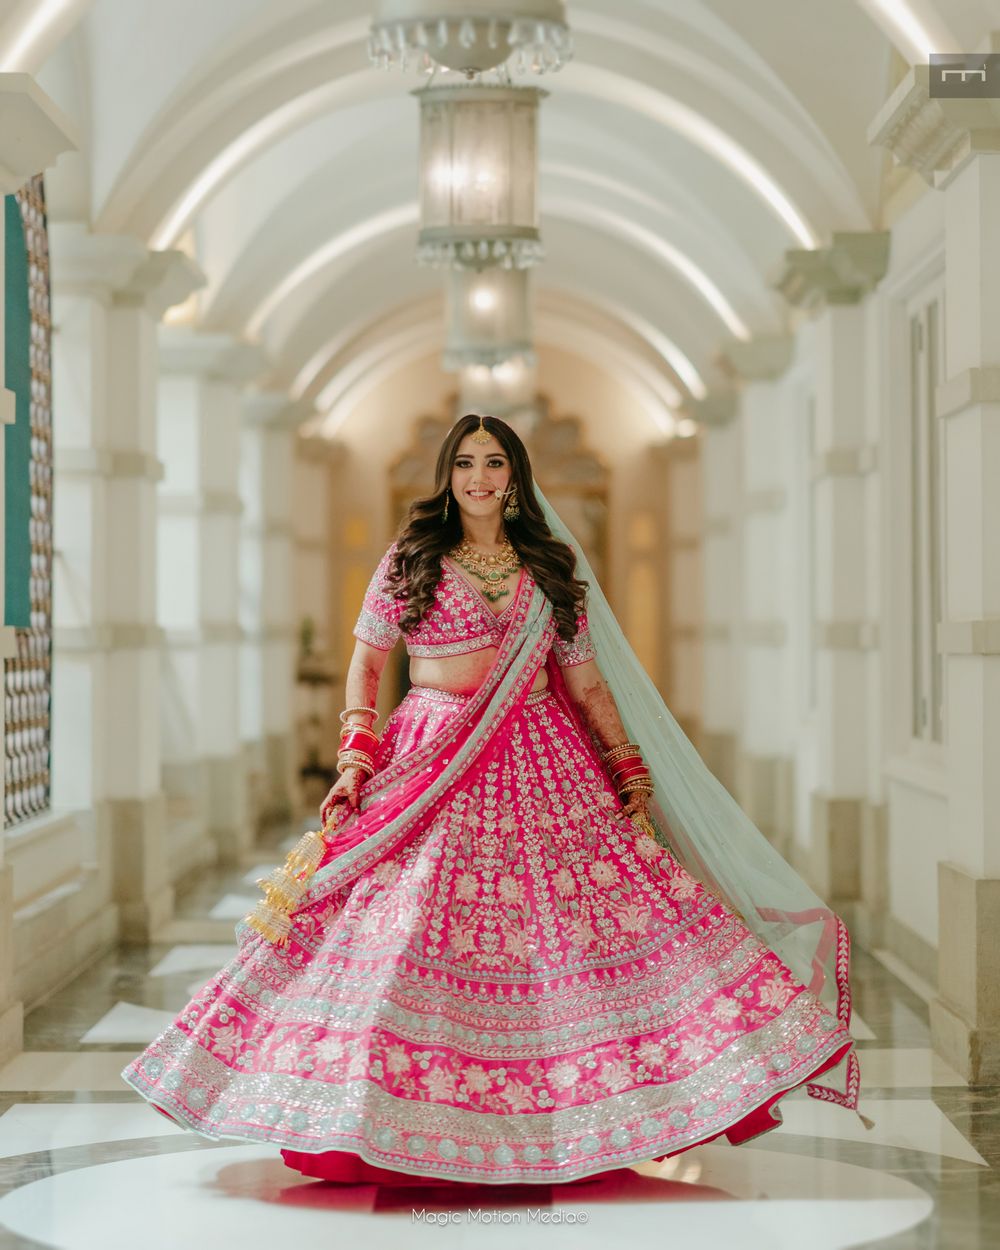 Photo of Bride twirling in a pink lehenga